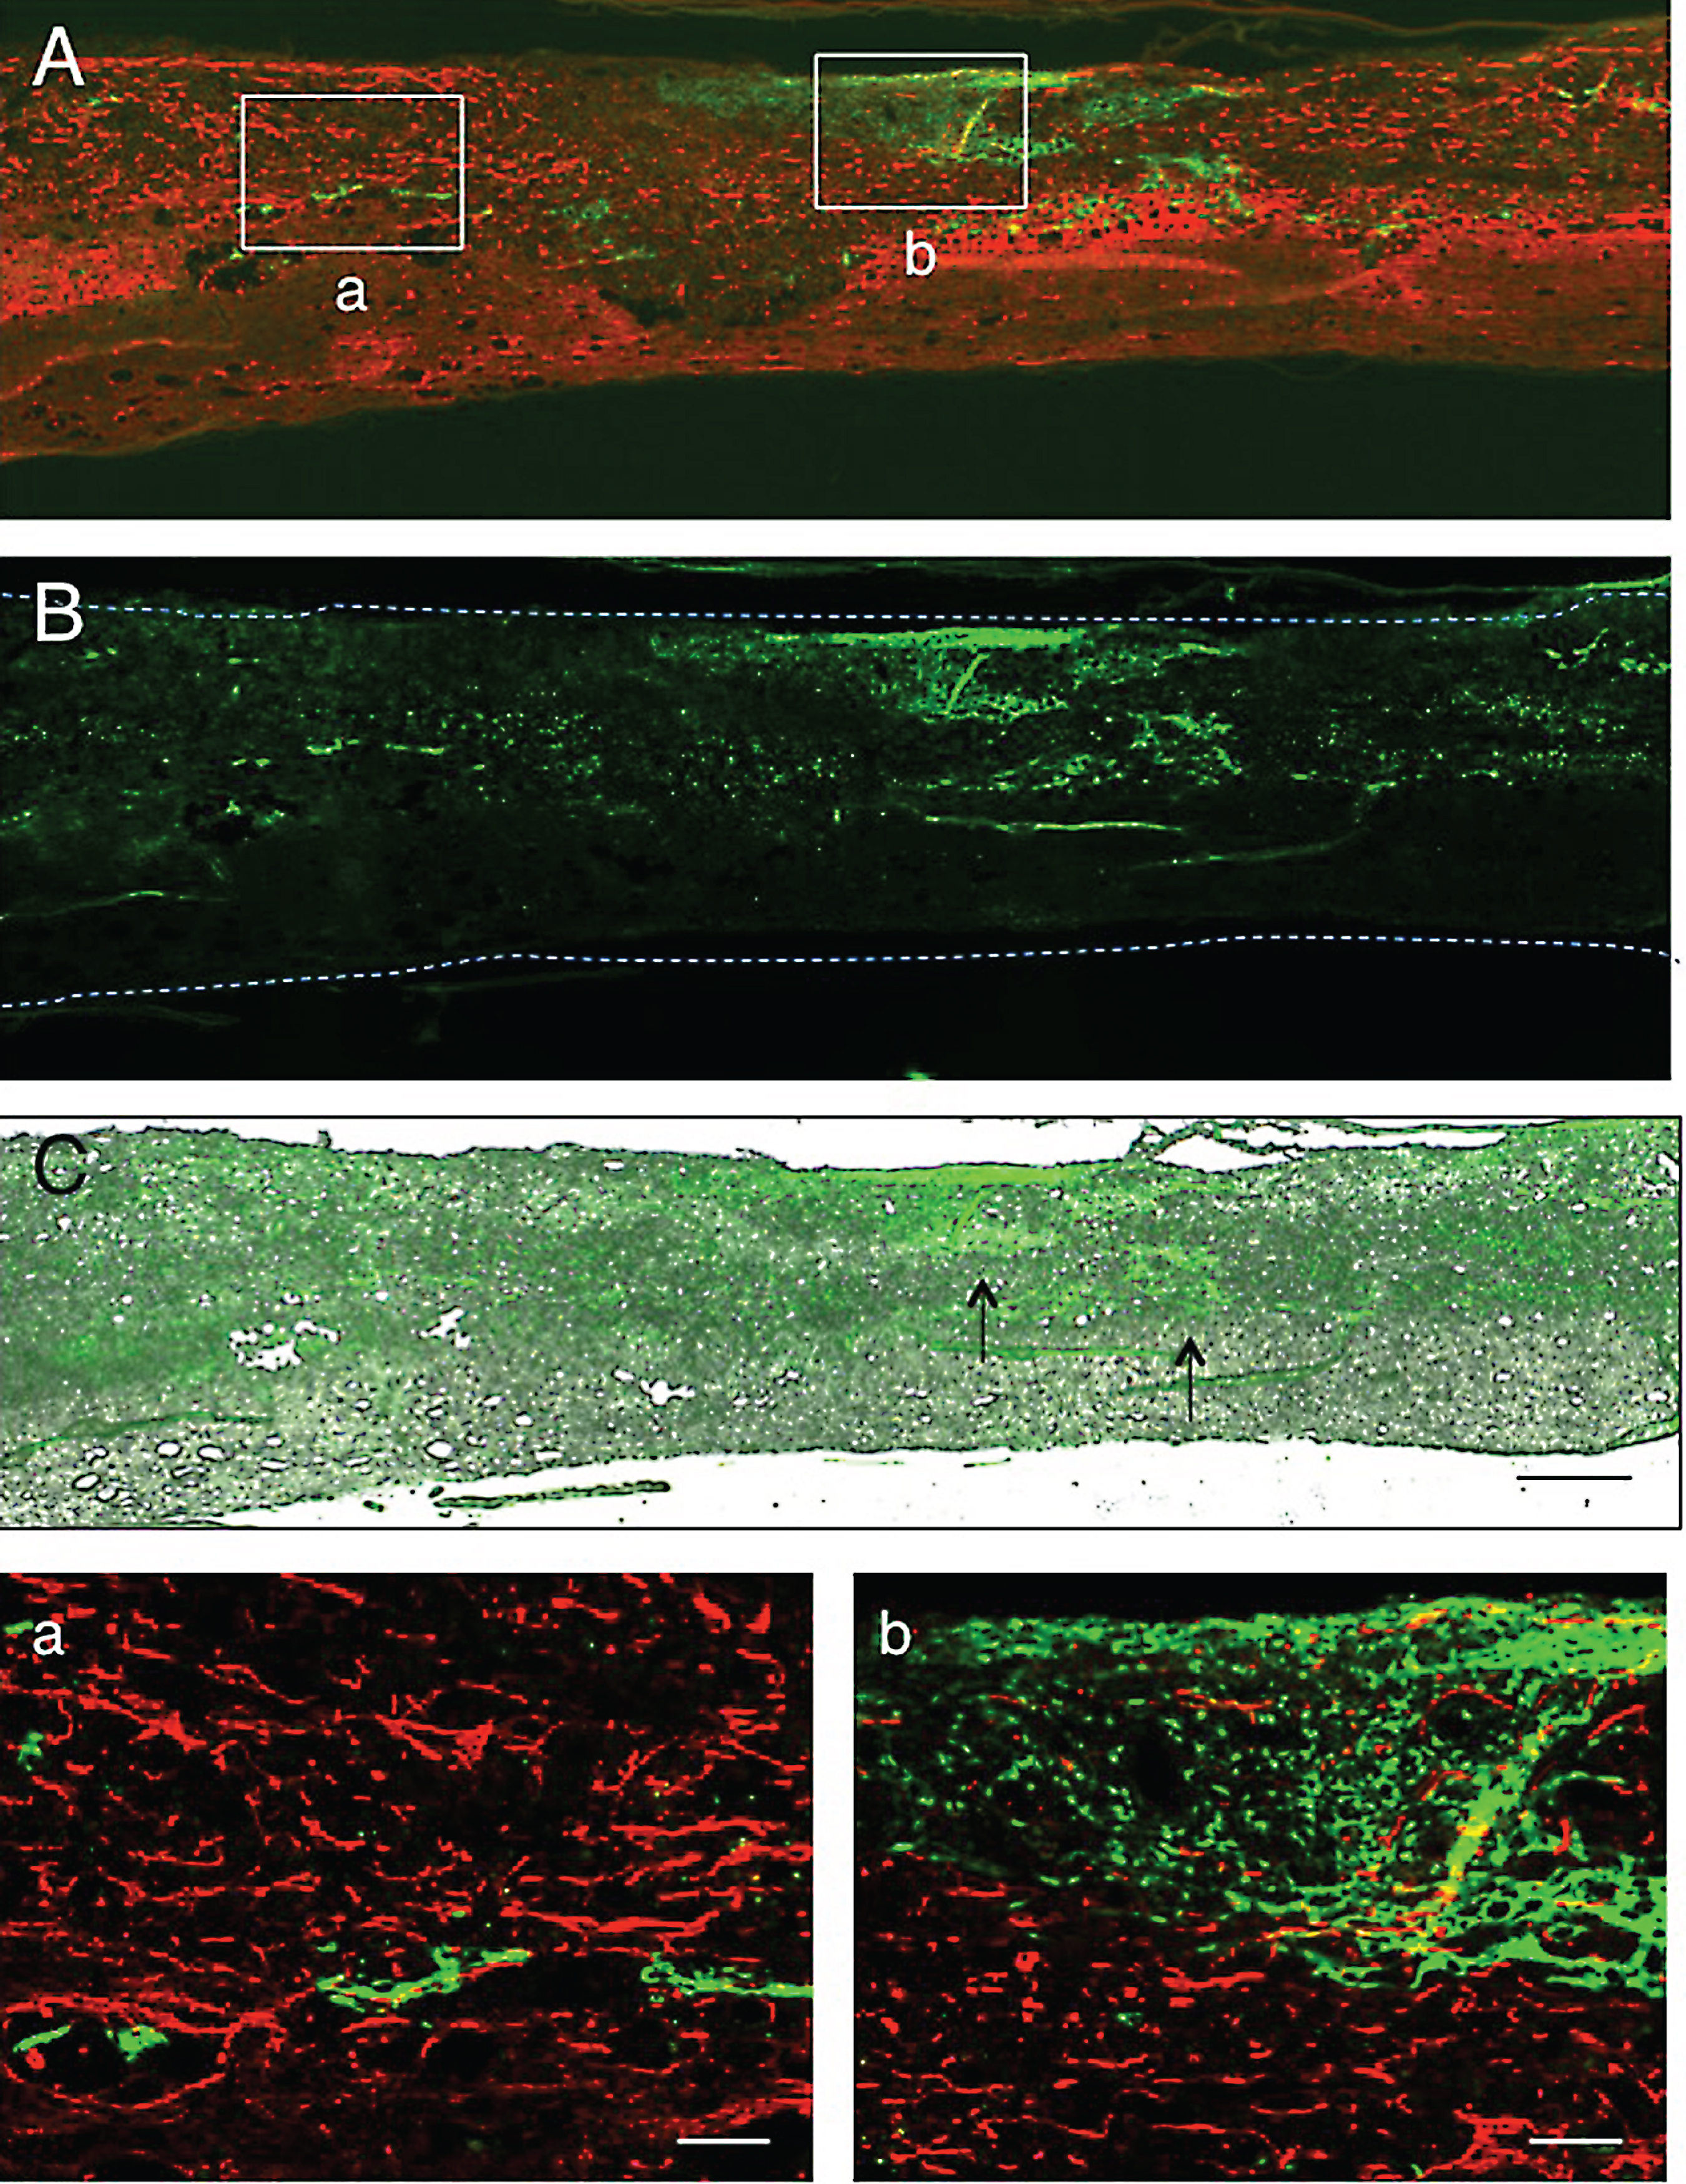 1 w-TP. Immunostaining for axons. The spinal cord was immunostained for axons. This micrograph was at a level several sections away from that of Fig. 4. A: Axons (red) are found in the remaining host spinal cord tissue and the astrocyte-devoid areas shown in Fig. 4A. CPEC clusters of various sizes (green) are located within and at the border of the lesion. B: This simple fluorescent micrograph was taken from a section adjacent to that of panel A, showing clusters of engrafted CPECs. C: Panel B was merged in the unstained transmitted-light picture to show the localization of engrafted CPECs in the spinal cord tissue. Arrows point to some of the clusters. a: Rectangle a in panel A was enlarged. Small clusters of CPECs (green) can be seen among axons that have various diameters and irregular orientations. b: Rectangle b in panel A was enlarged. Axons are scarce around and within the stacked CPECs (green). Scale: 500 μm for A-C, and 100 μm for a and b.